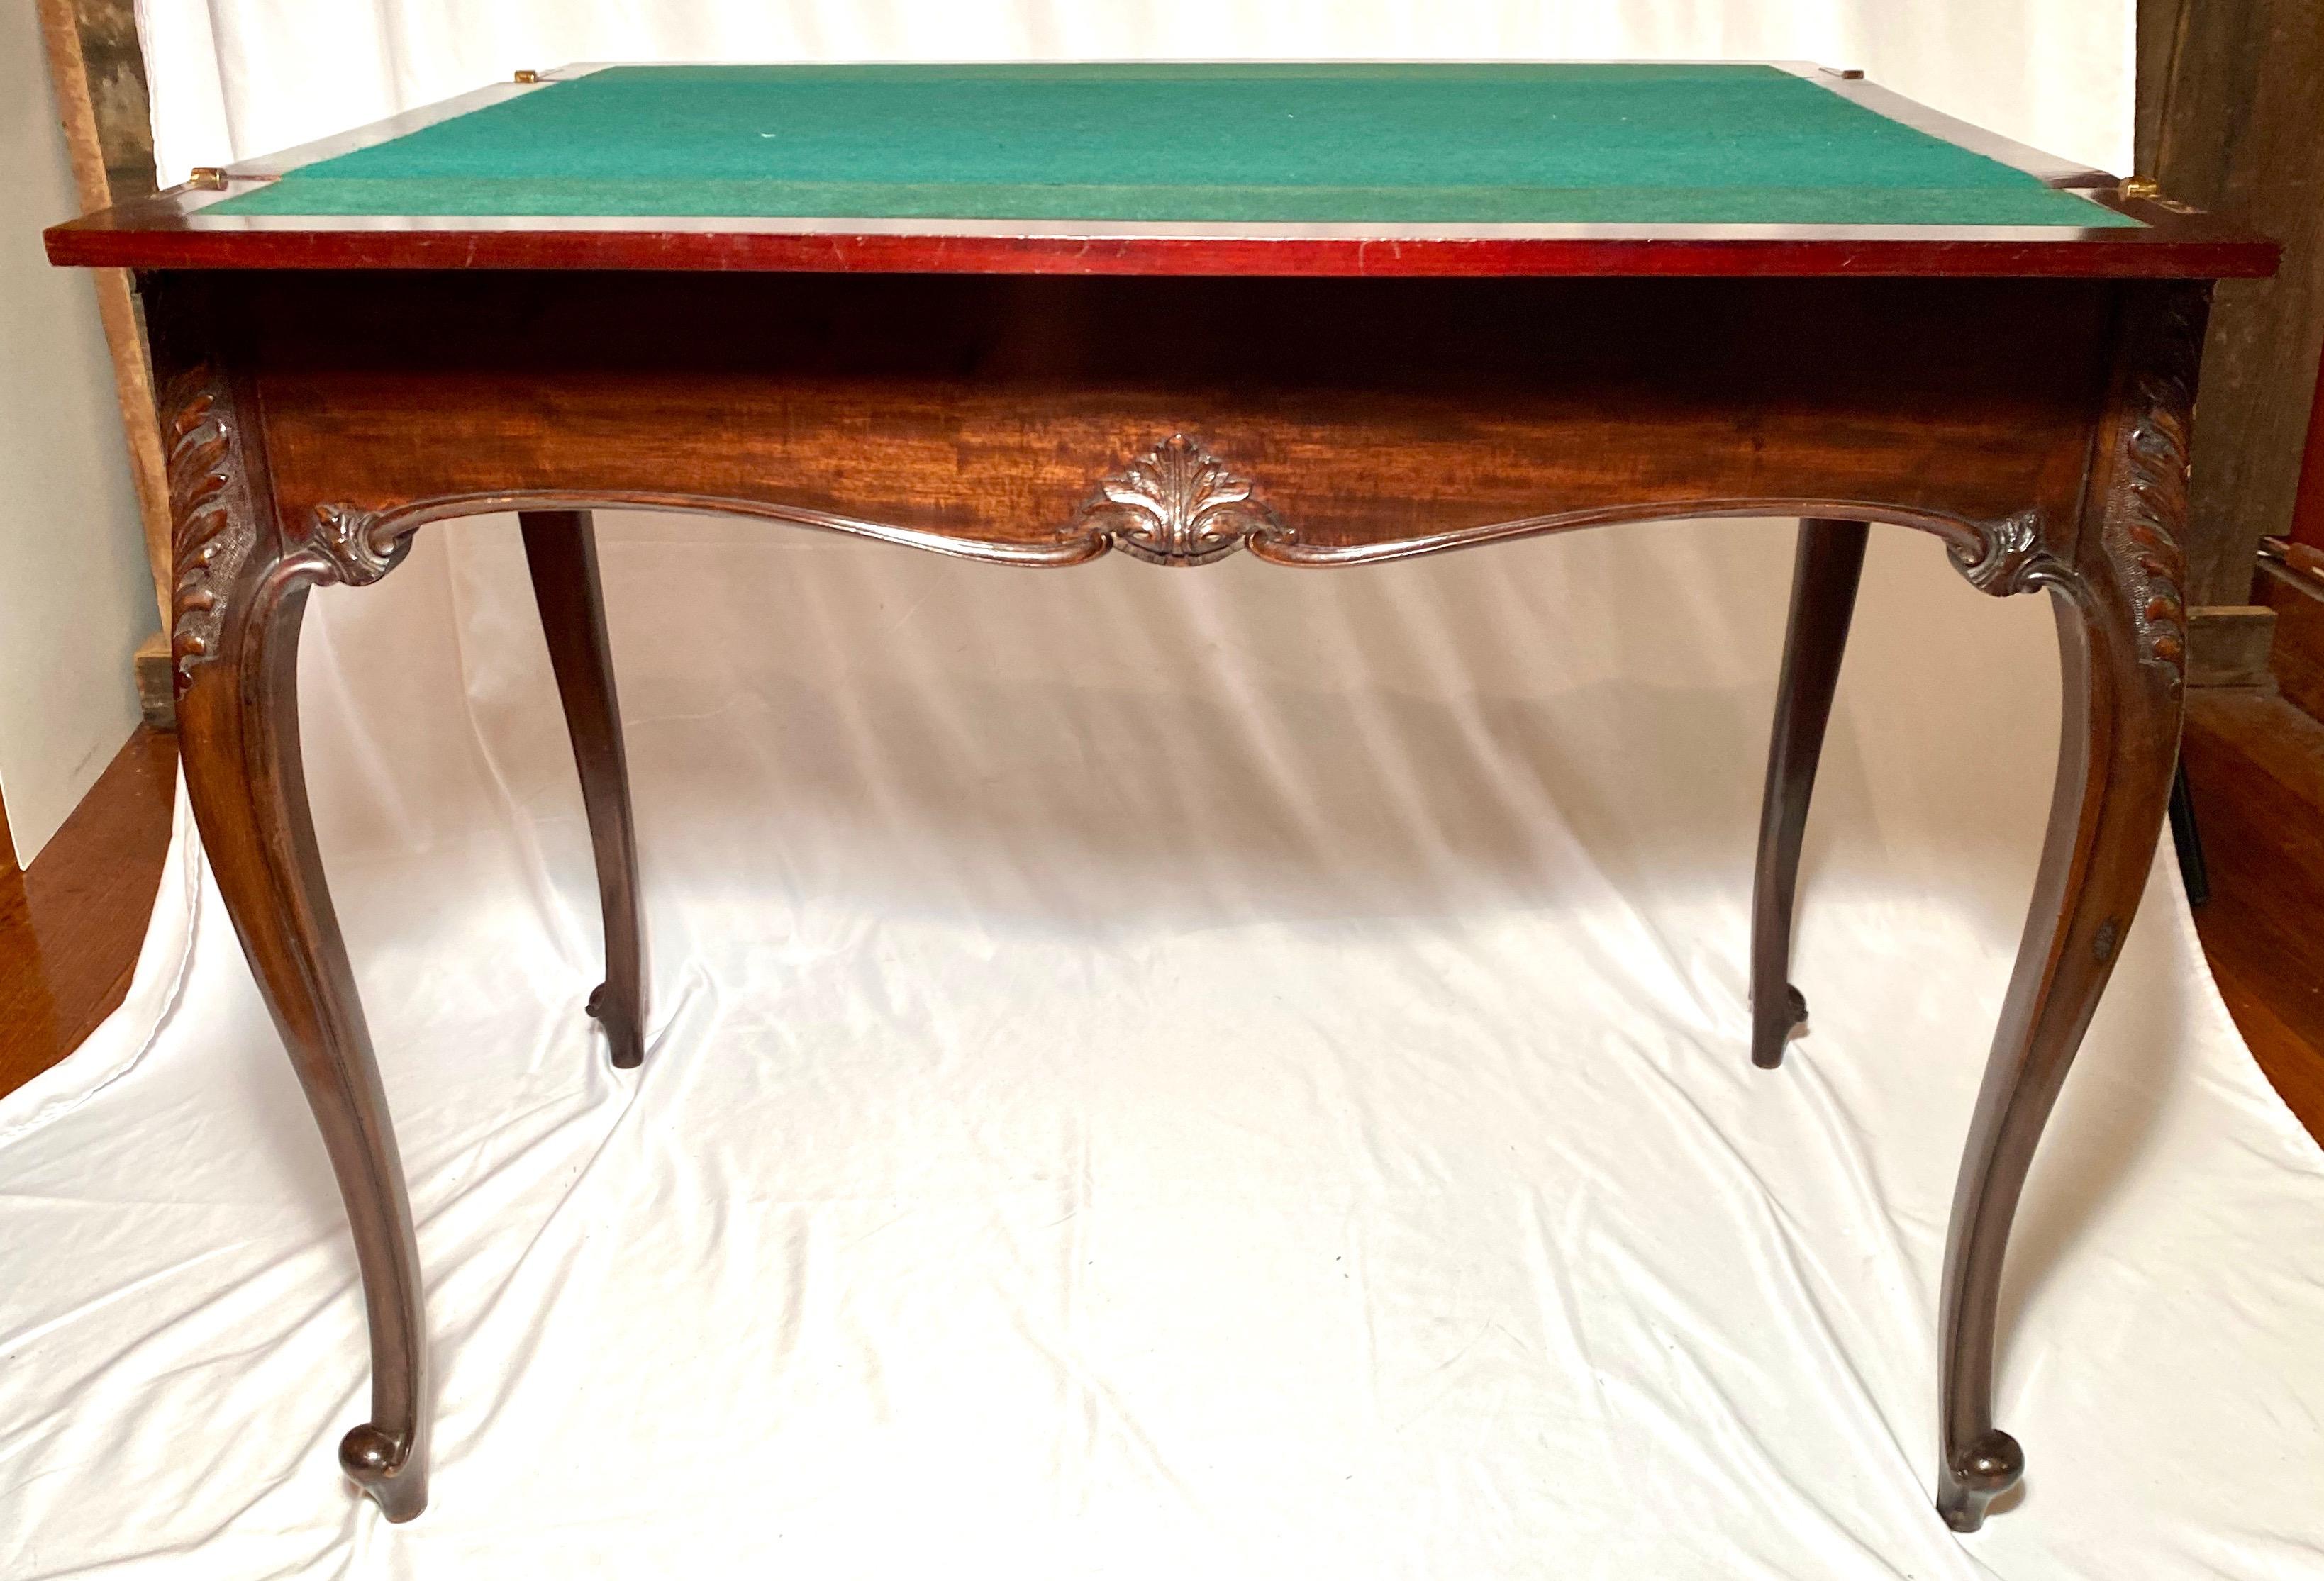 Antique English Mahogany Roulette Card Table, circa 1890 In Good Condition For Sale In New Orleans, LA